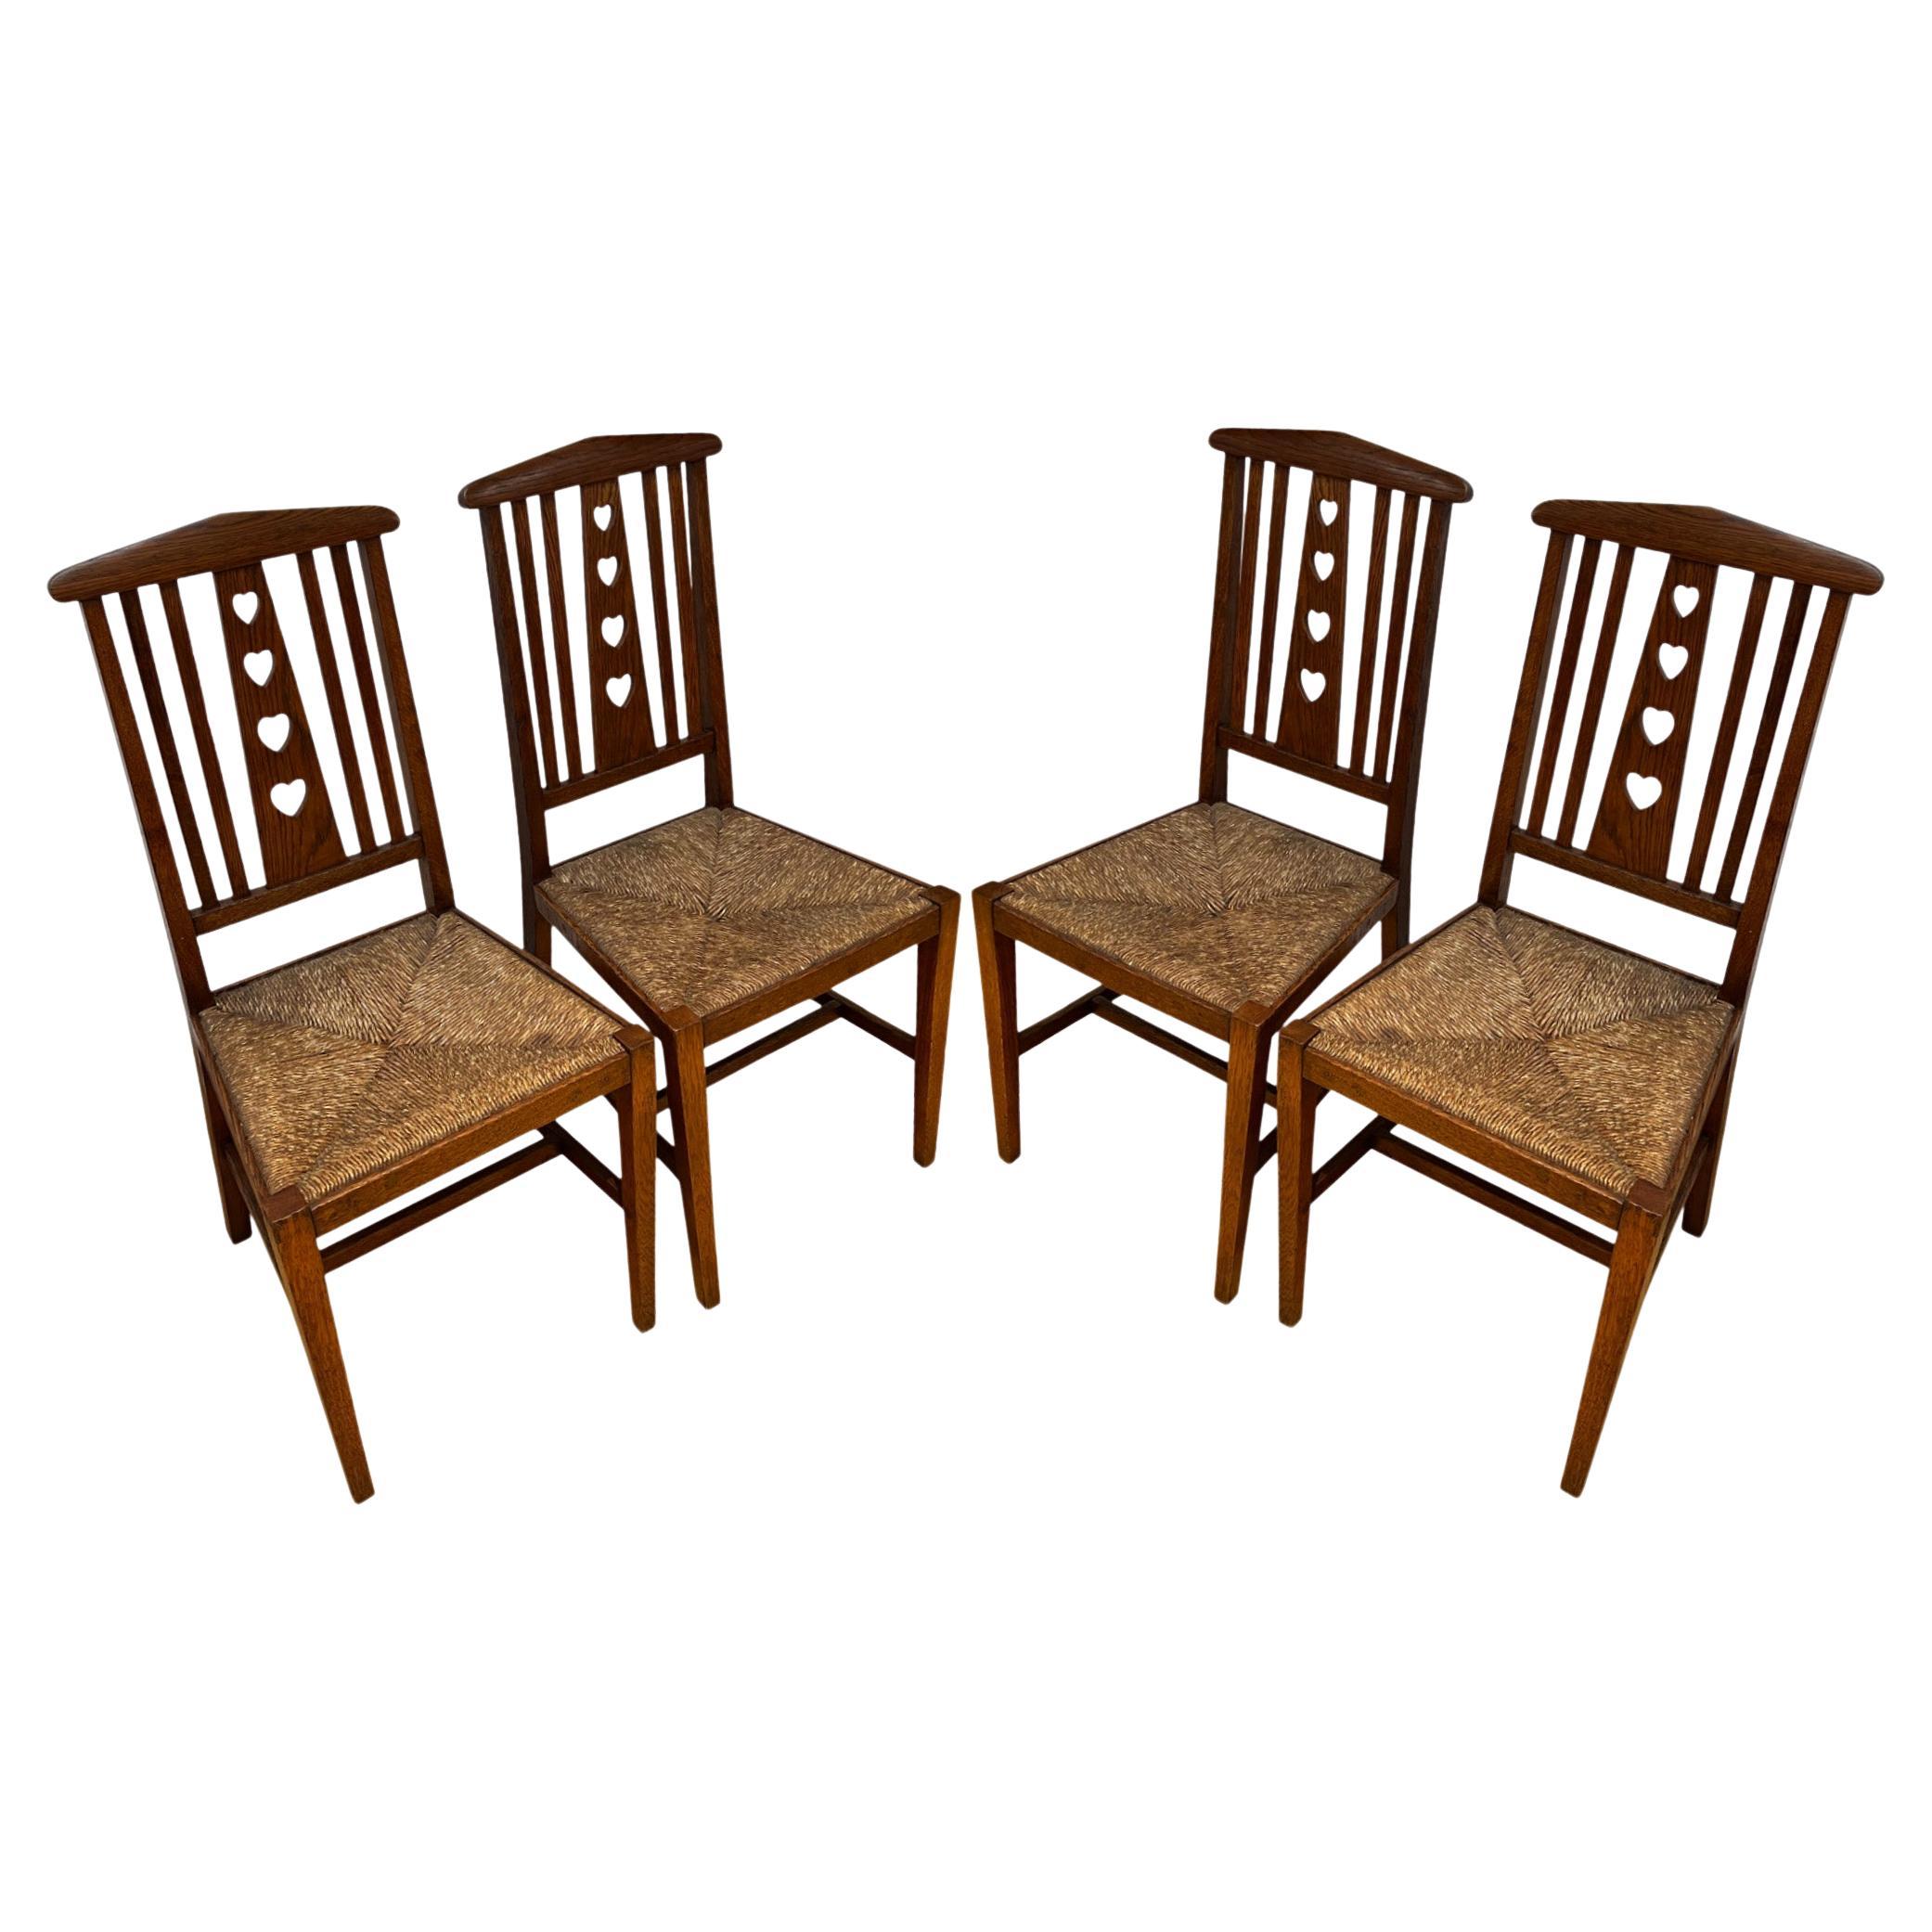 Set of 4 Dining Chairs, Art and Crafts With Heart Detail For Sale